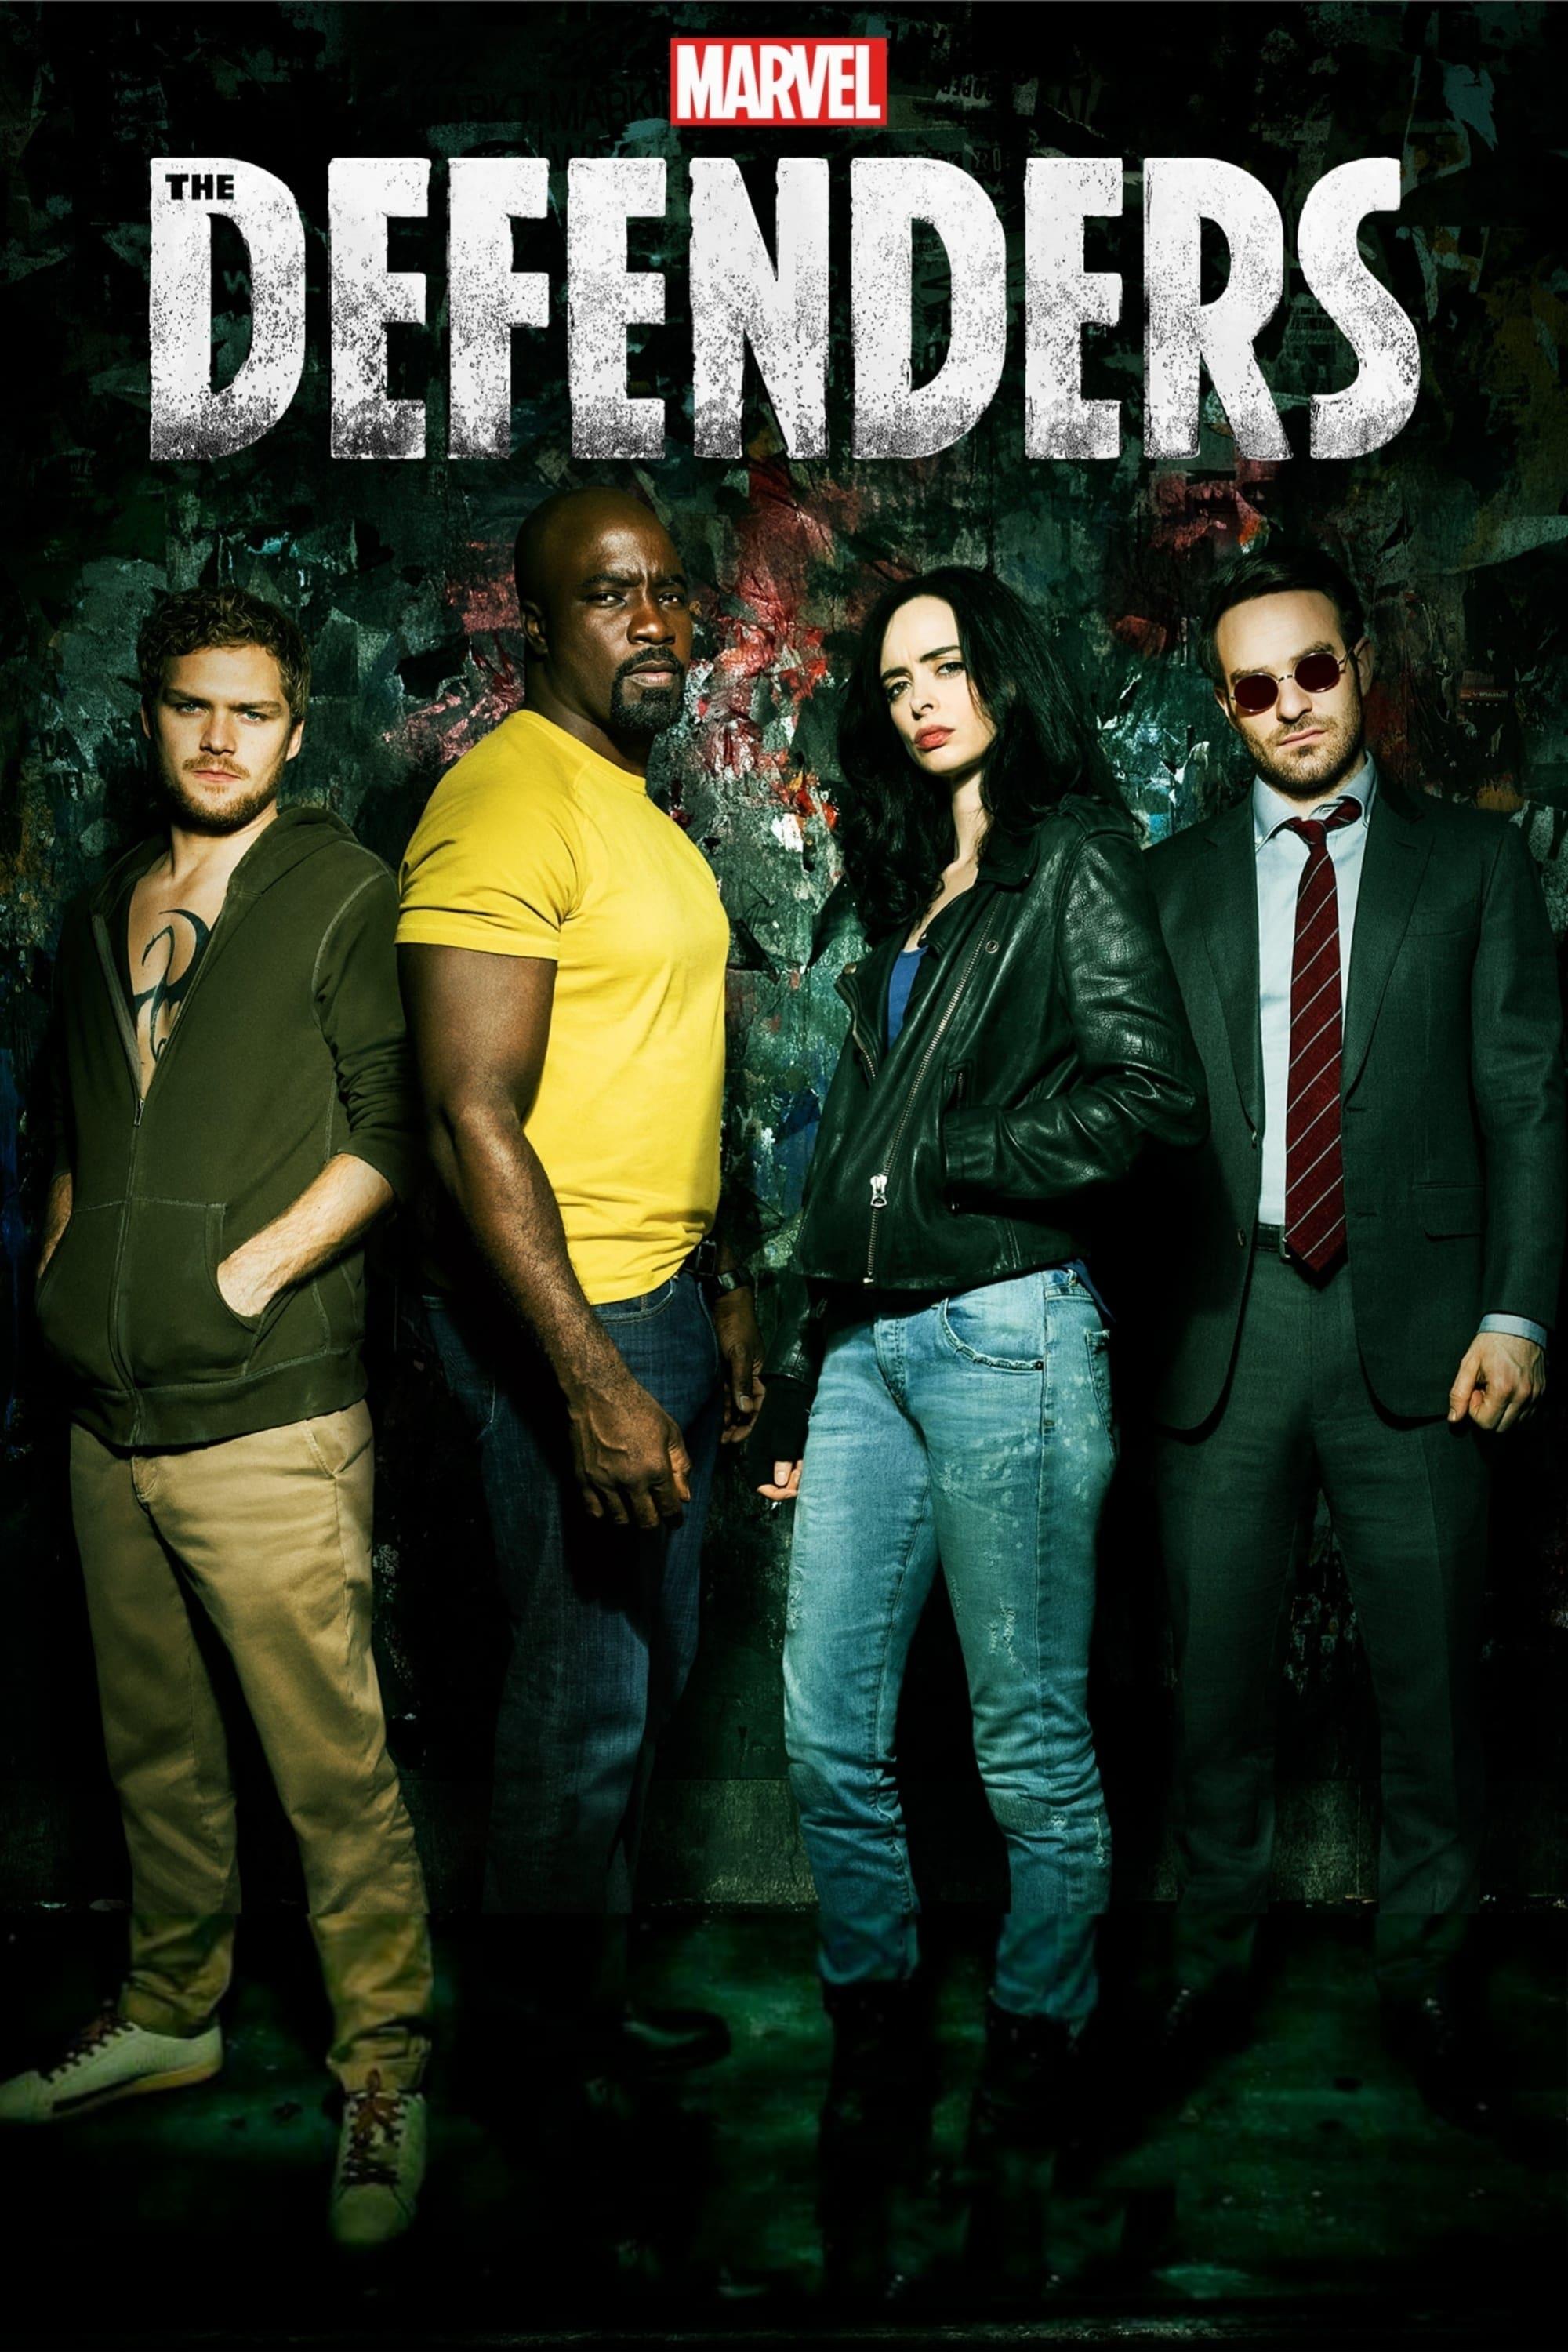 Marvel's The Defenders poster